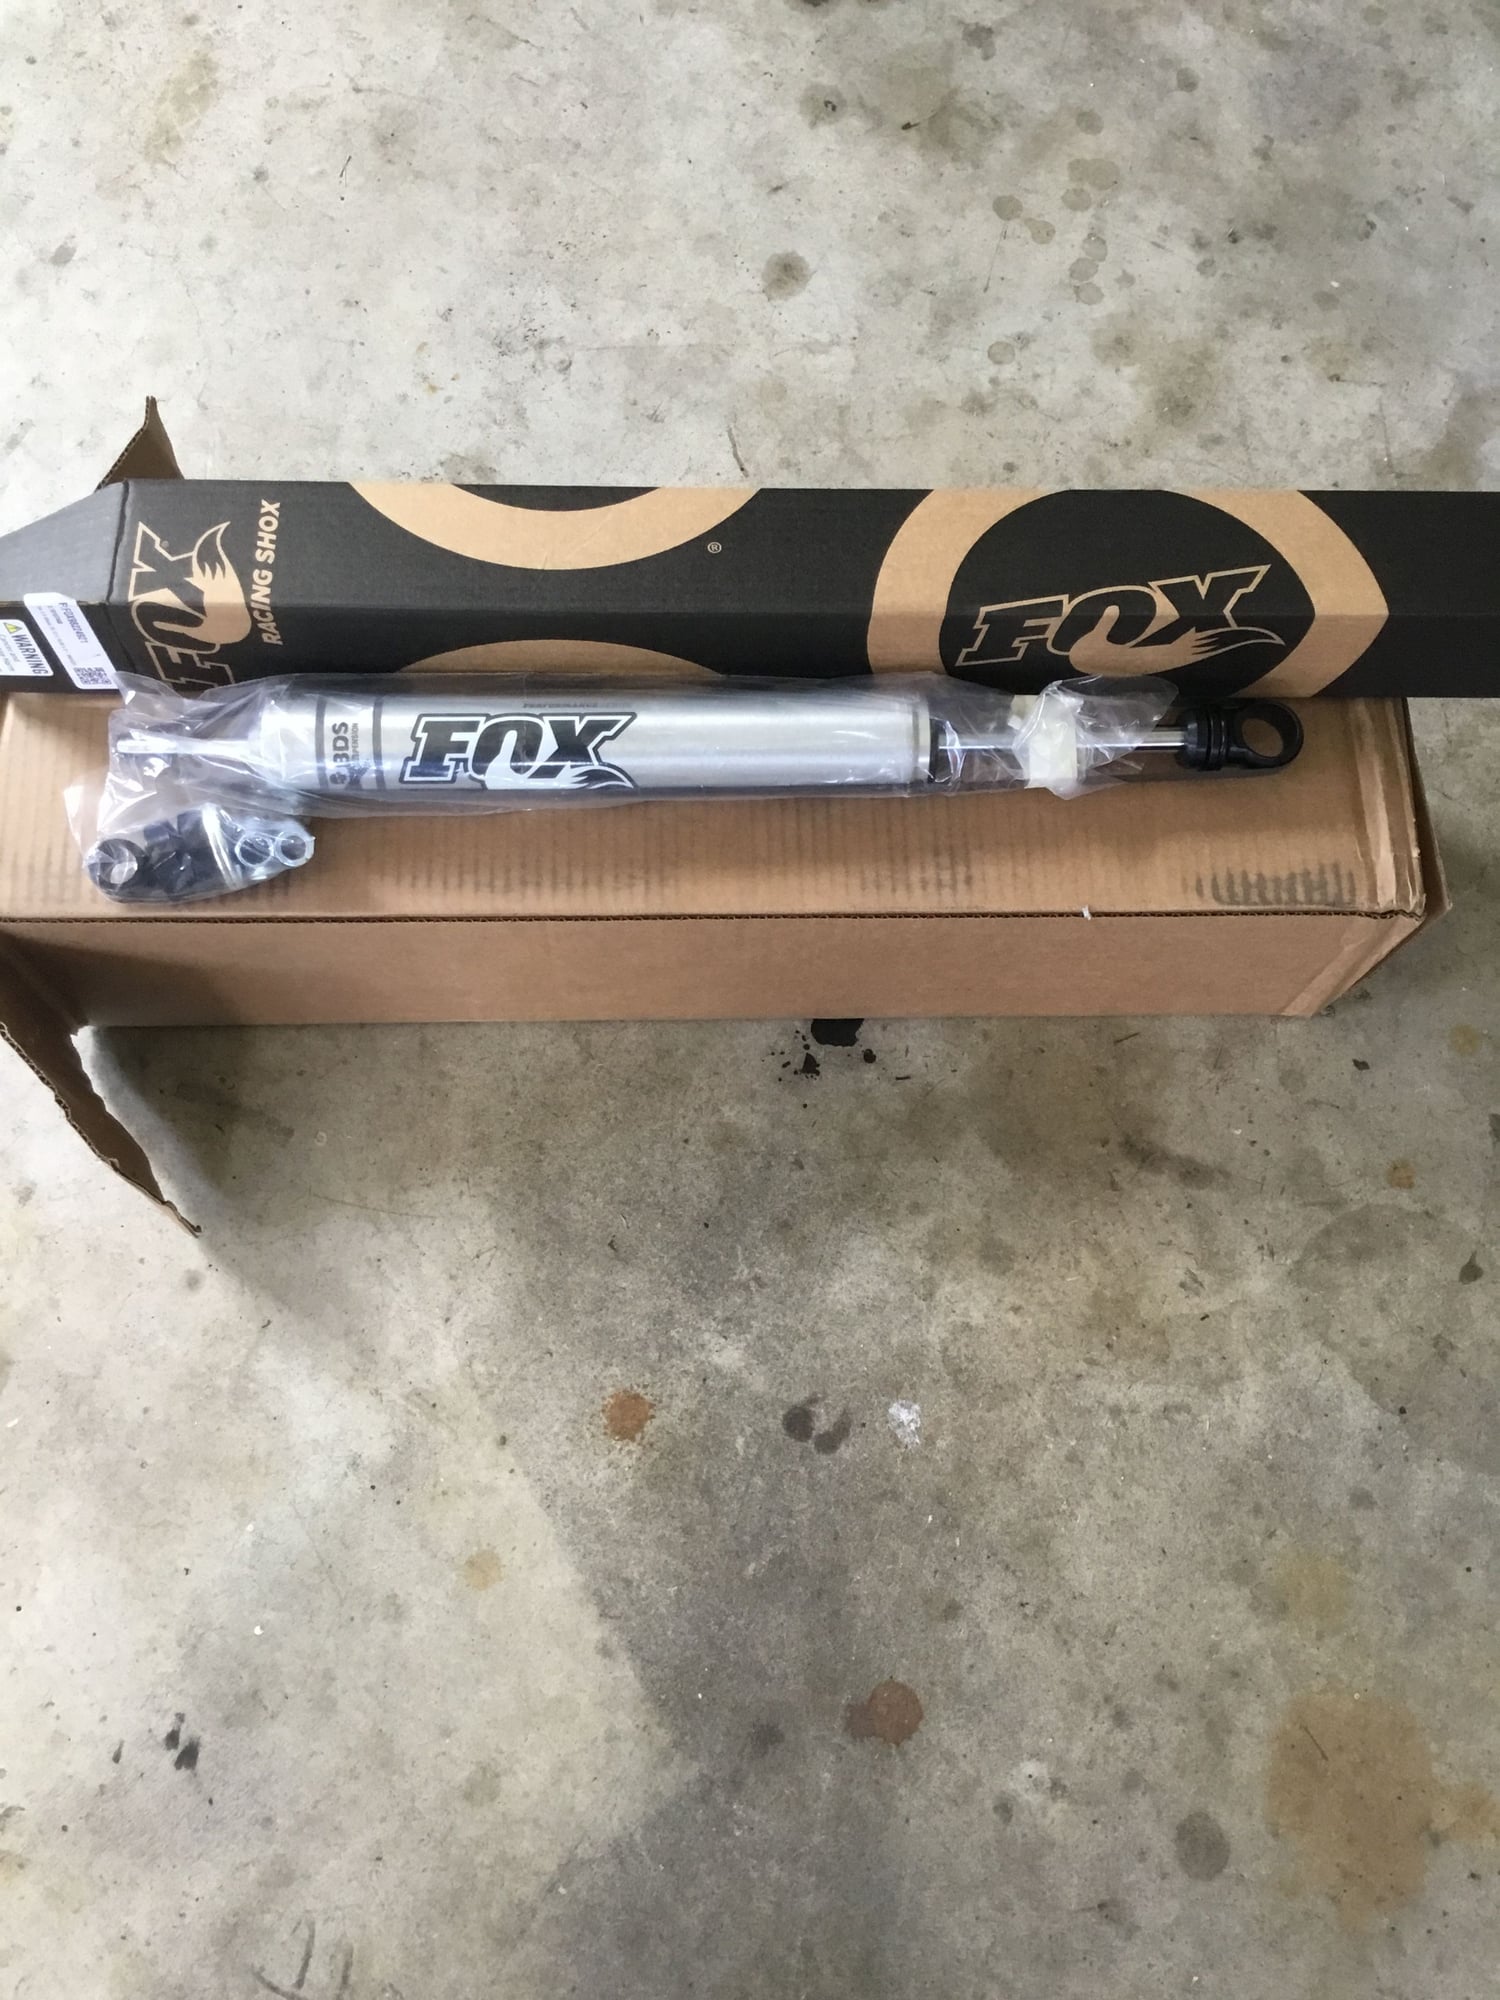 Steering/Suspension - New fox 2.0 ifp shocks for 2-4 inch lift - New - 2007 to 2017 Jeep Wrangler - Manville, NJ 08835, United States